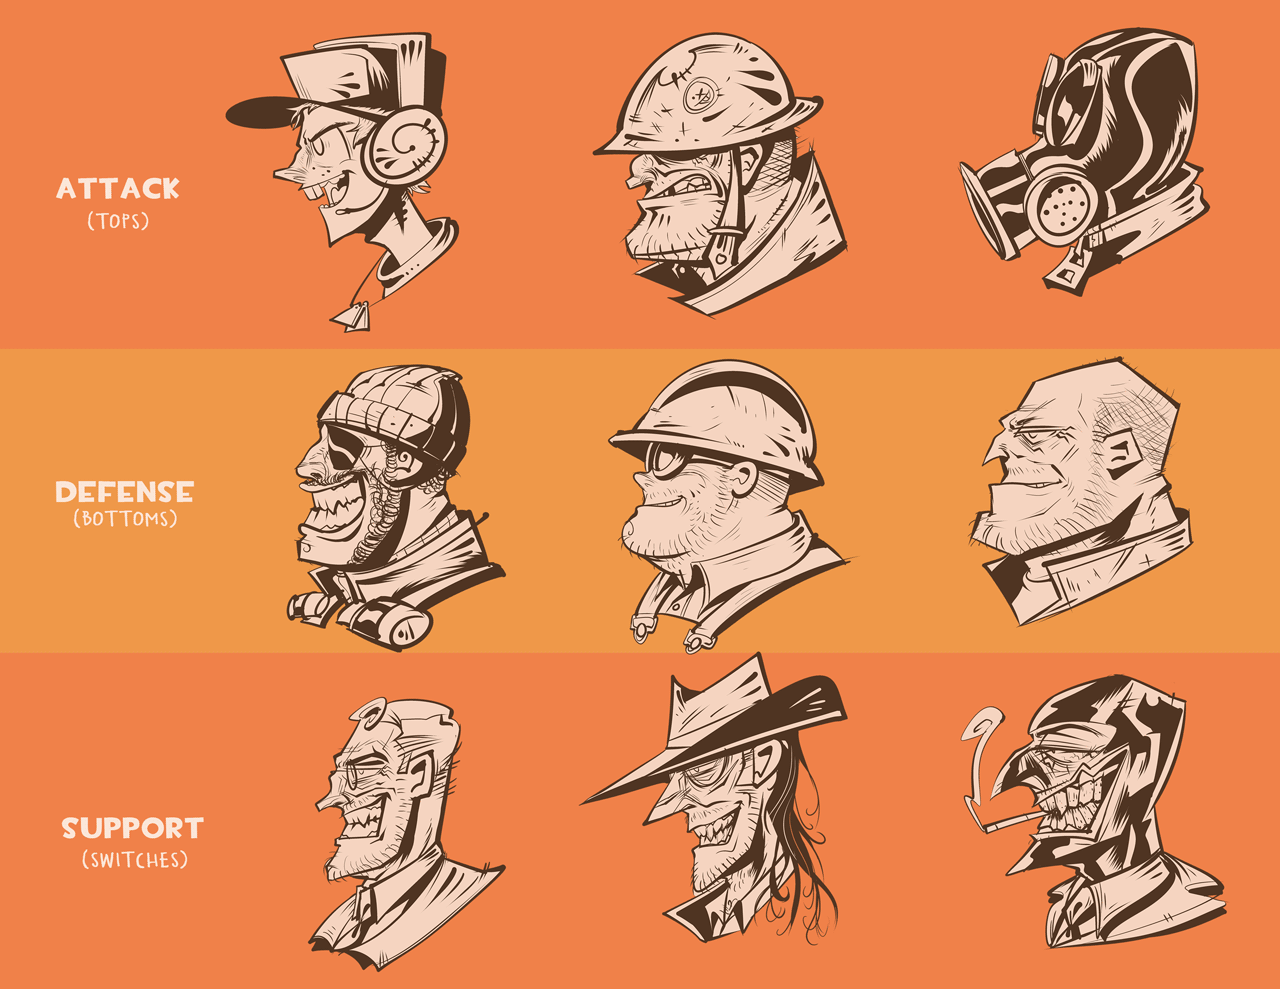 headshot drawings of all the TF2 classes